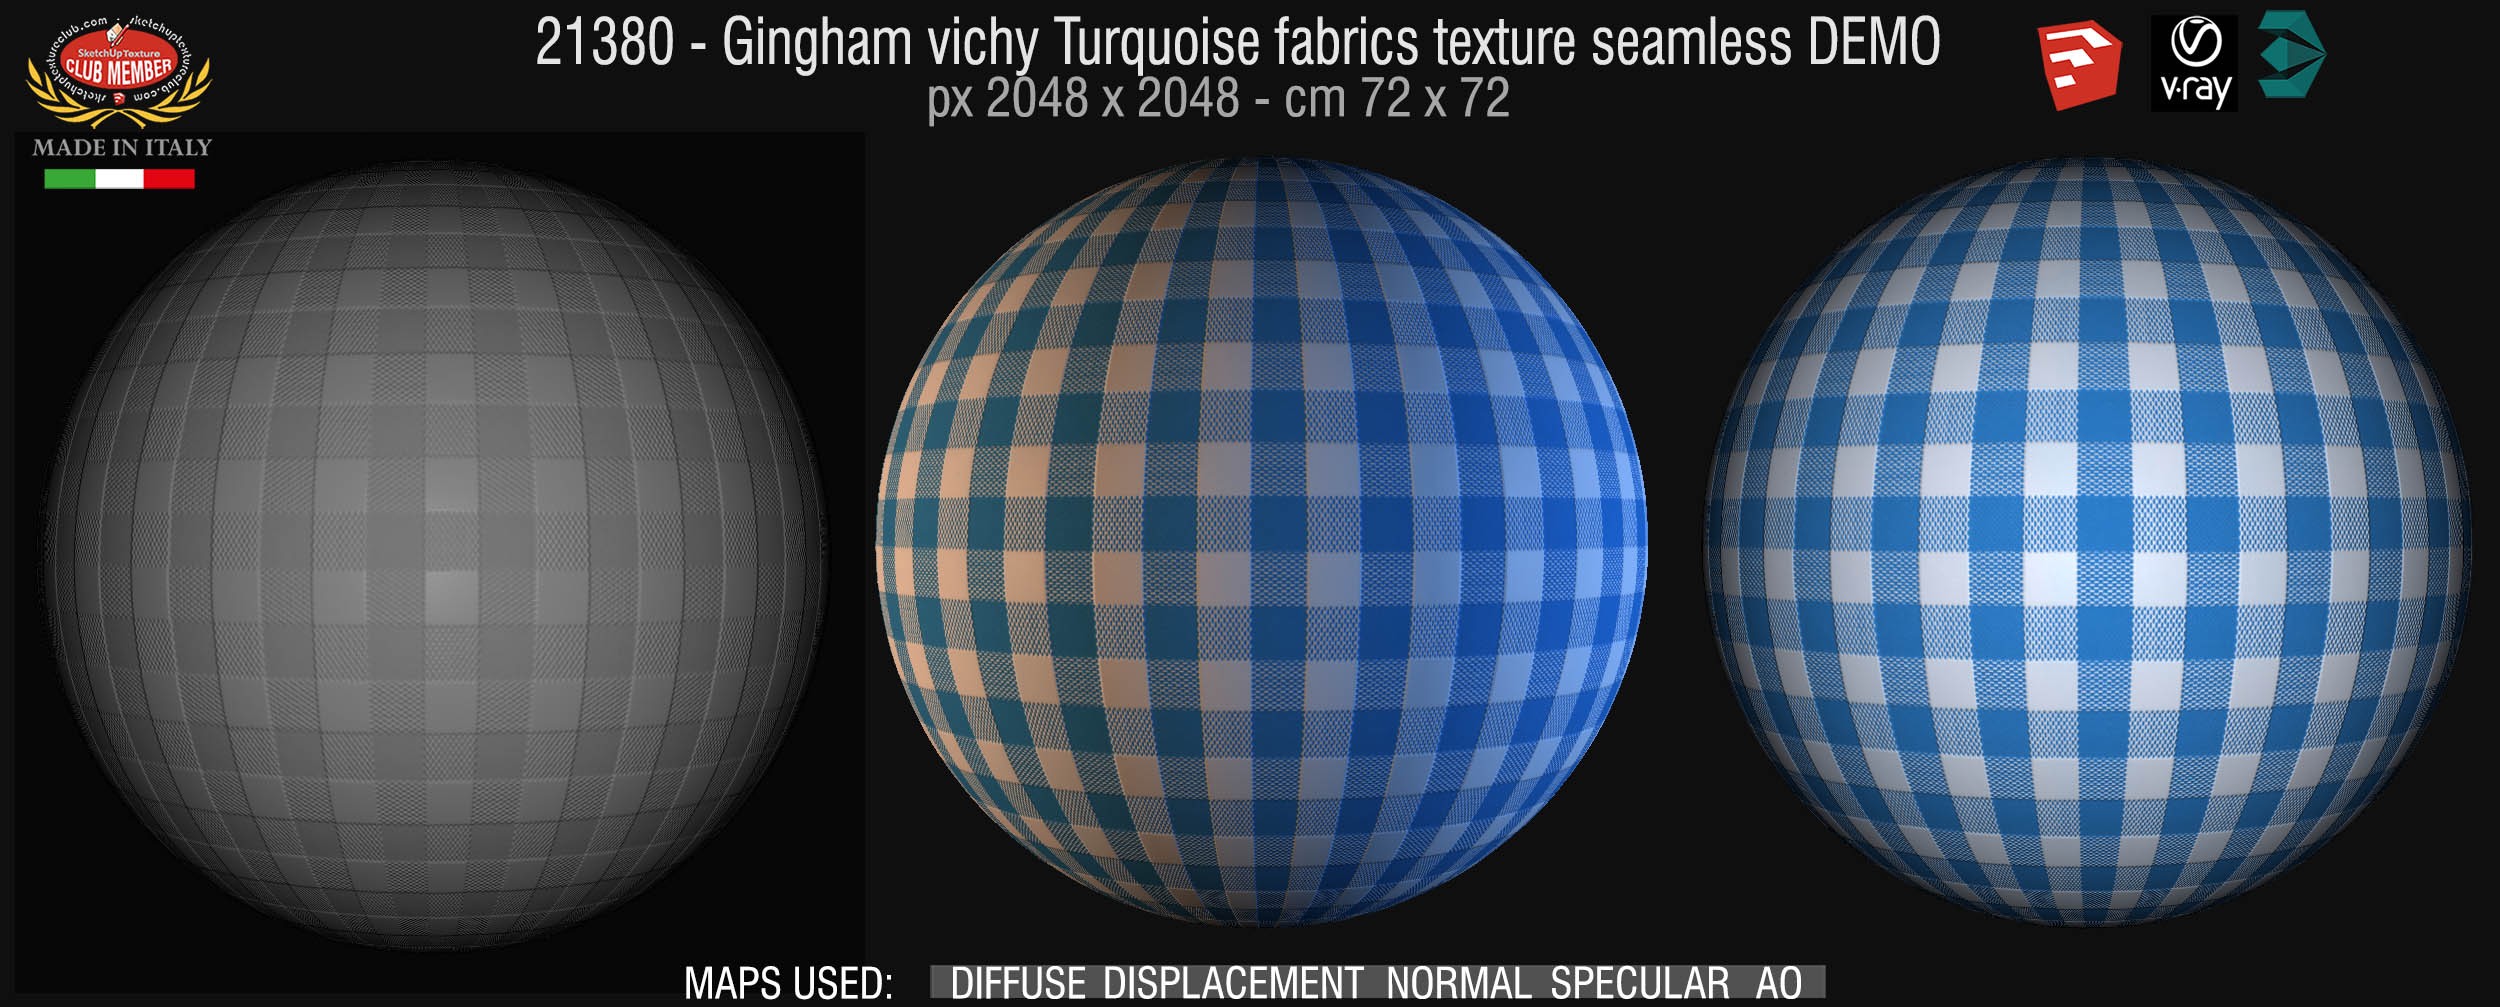 21380 Gingham vichy turquoise fabrics texture + maps DEMO